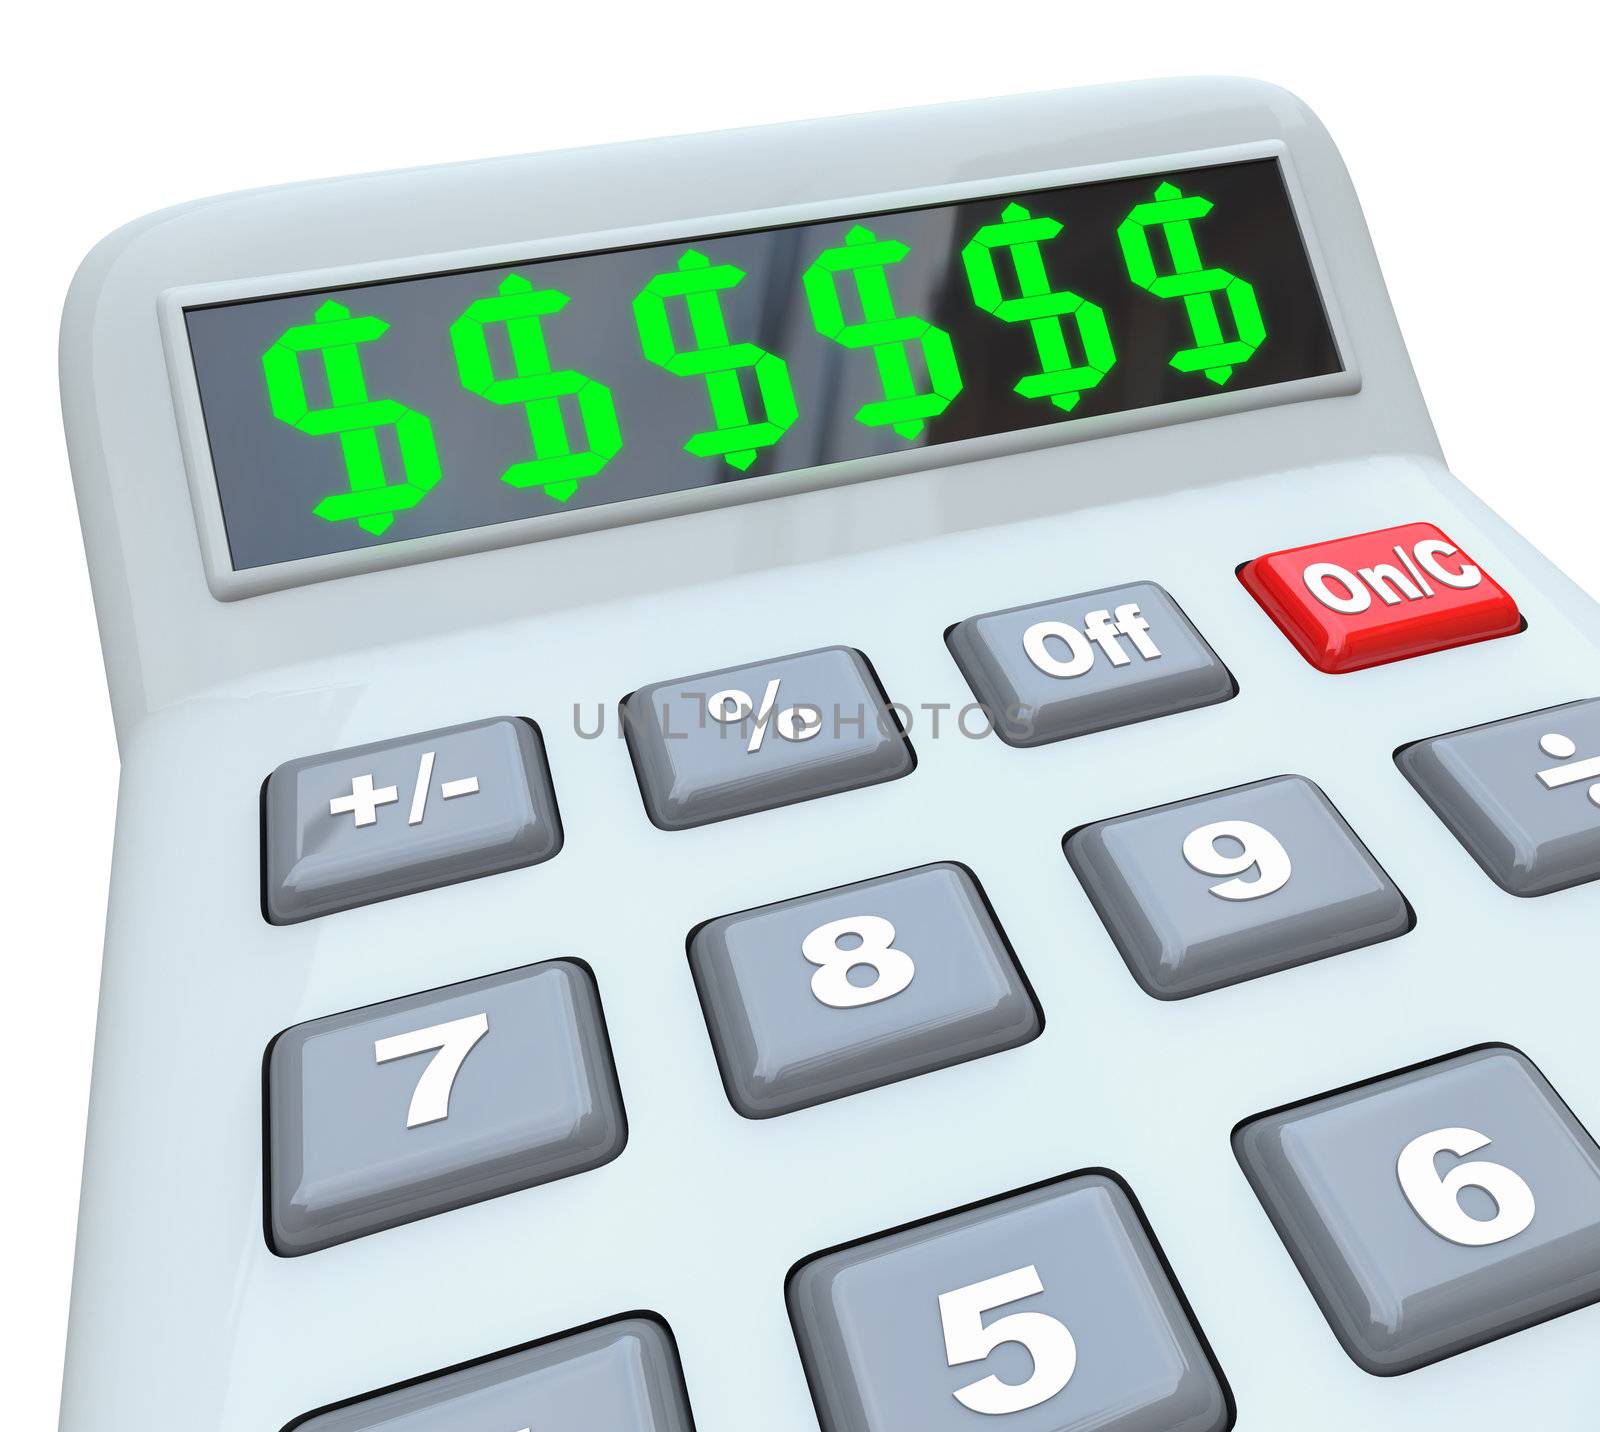 Several dollar signs on a calculator display as you add up your costs, expenses, income, savings, budget, bills, pay, or other financial measurement